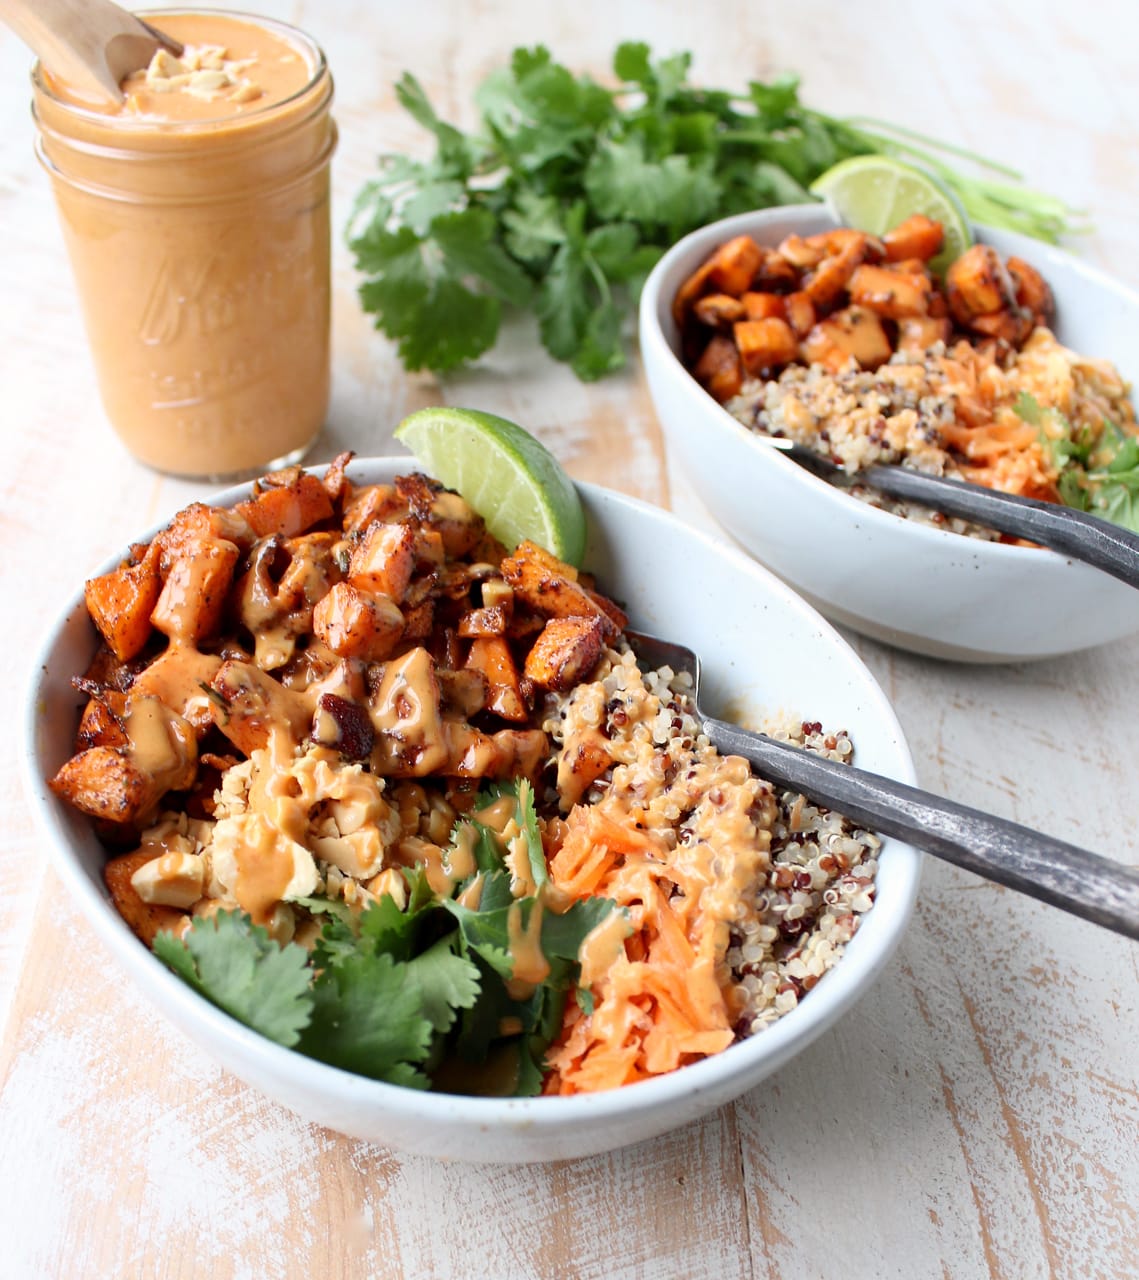 Roasted sweet potatoes in bowls with quinoa, shredded carrots and cilantro